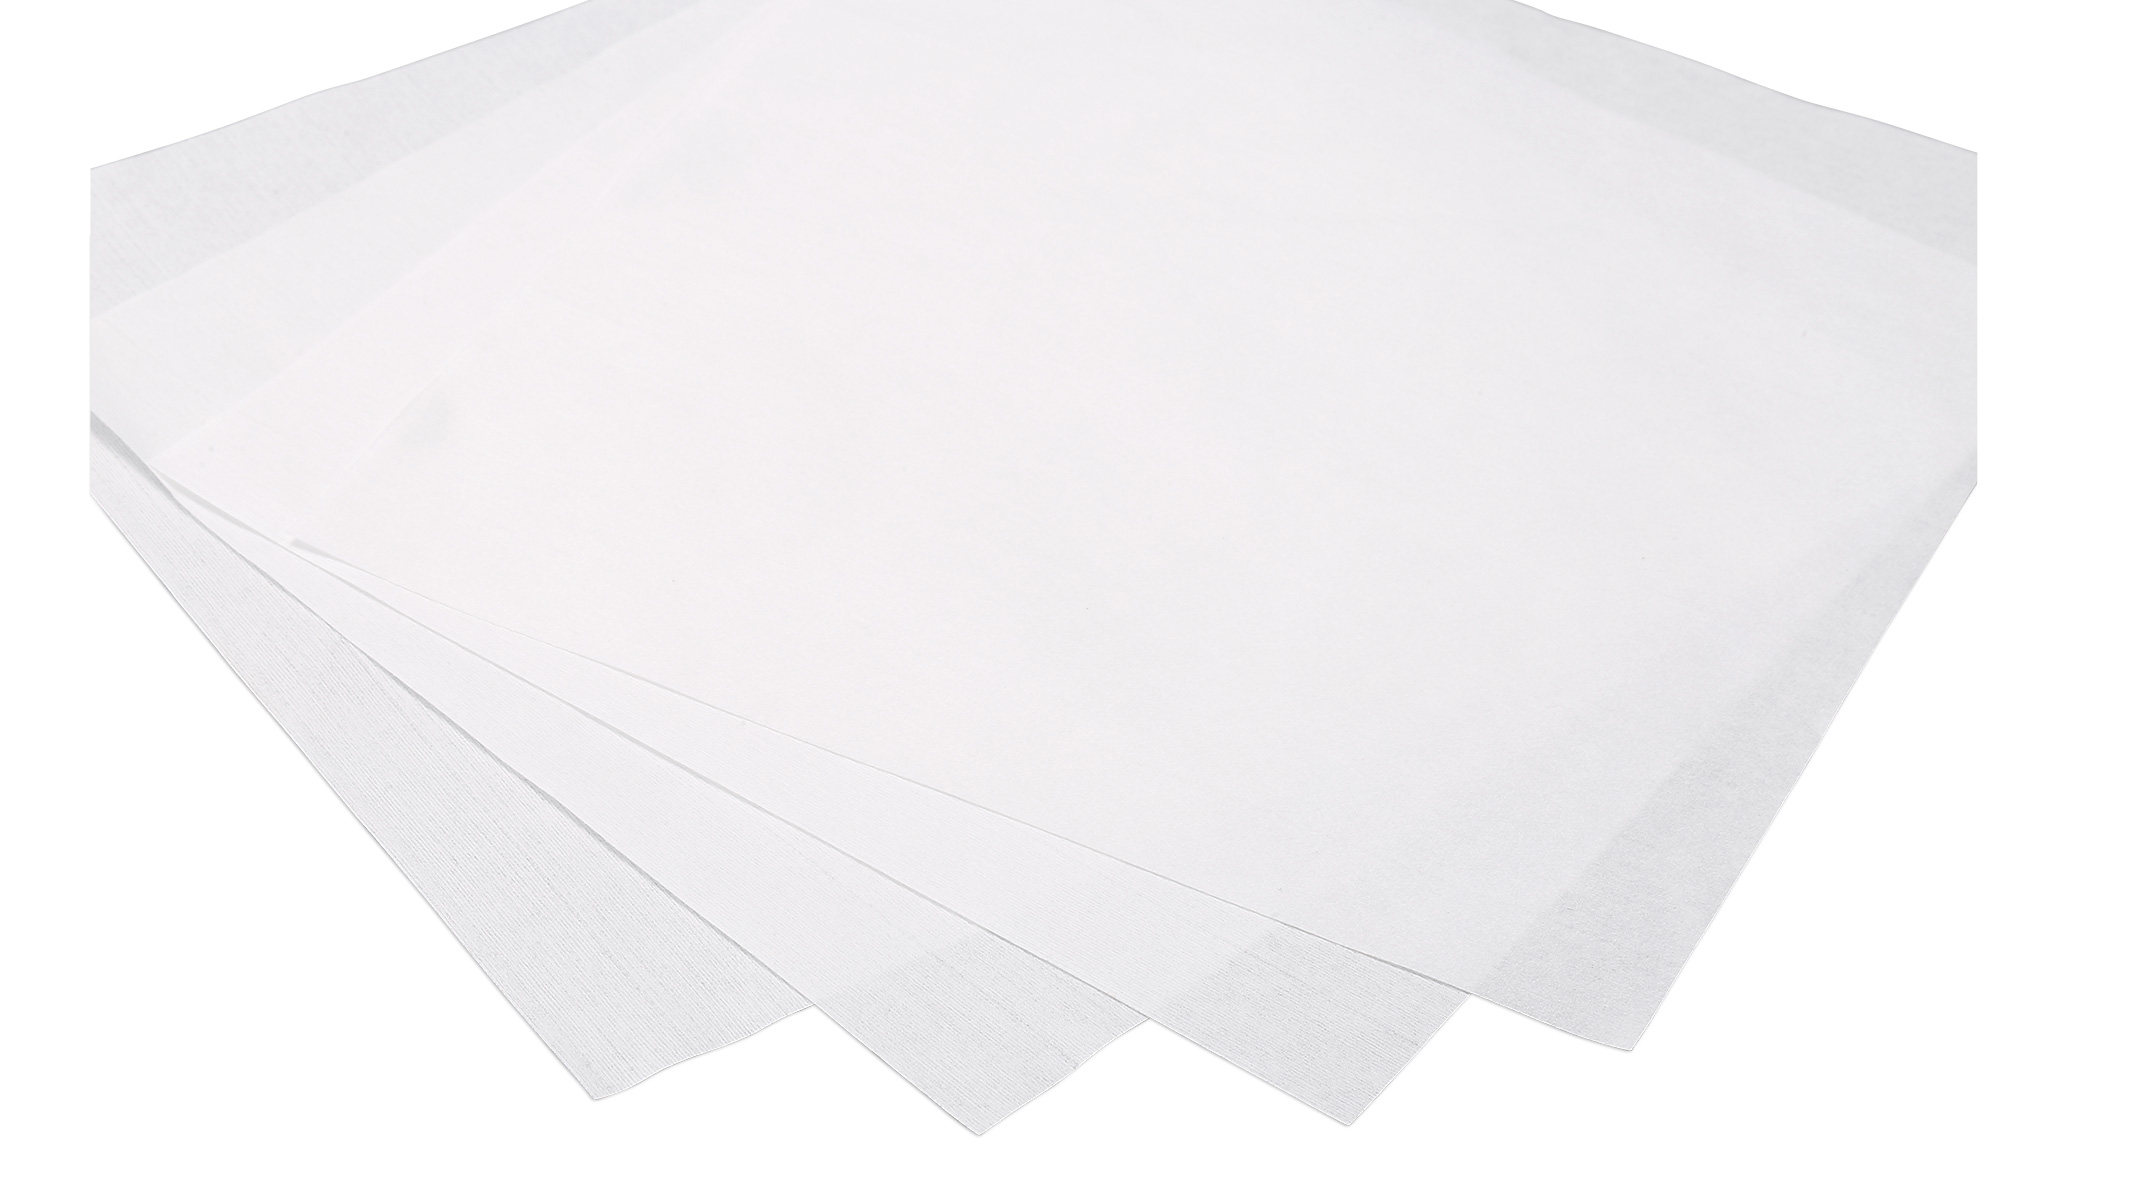 Cleanroom wipes made of cellulose polyester, nonwoven, 100 pieces